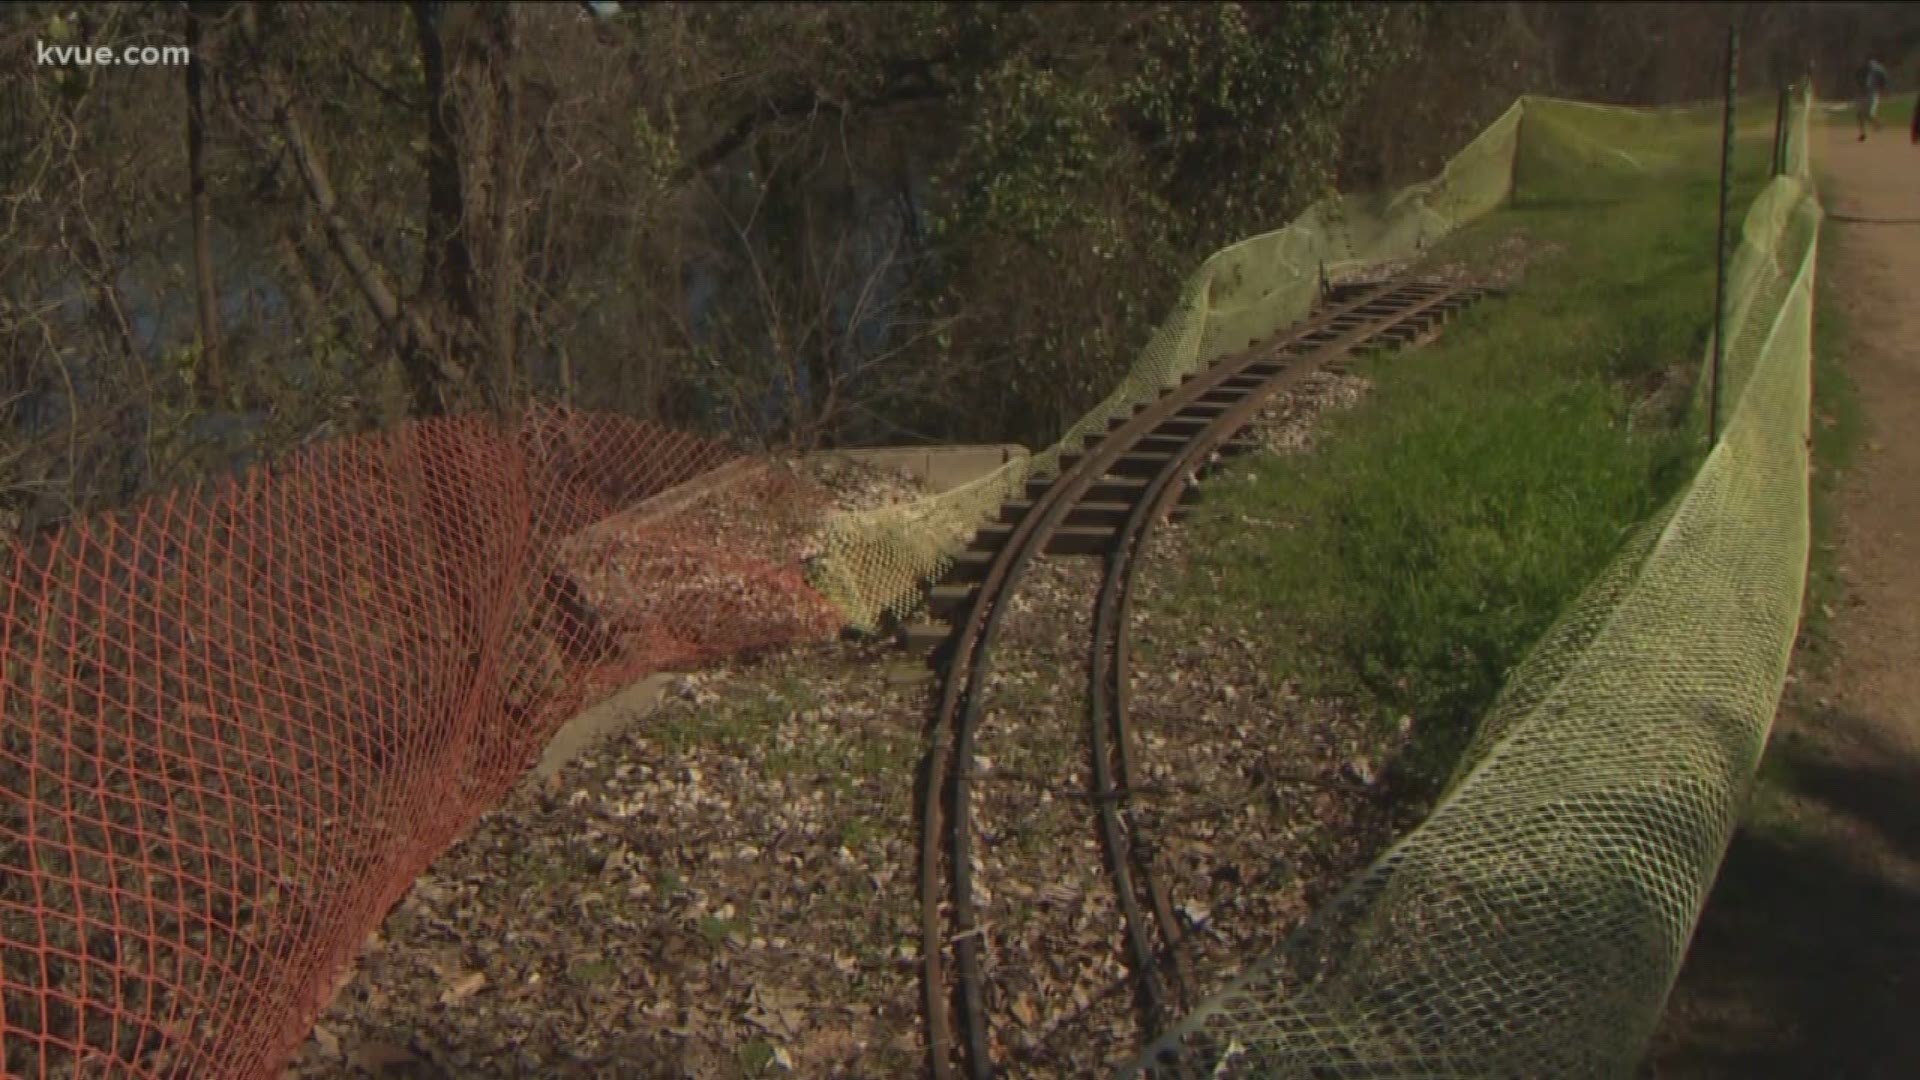 It's not the end of the Zilker Zephyr – but it is the end of an era.